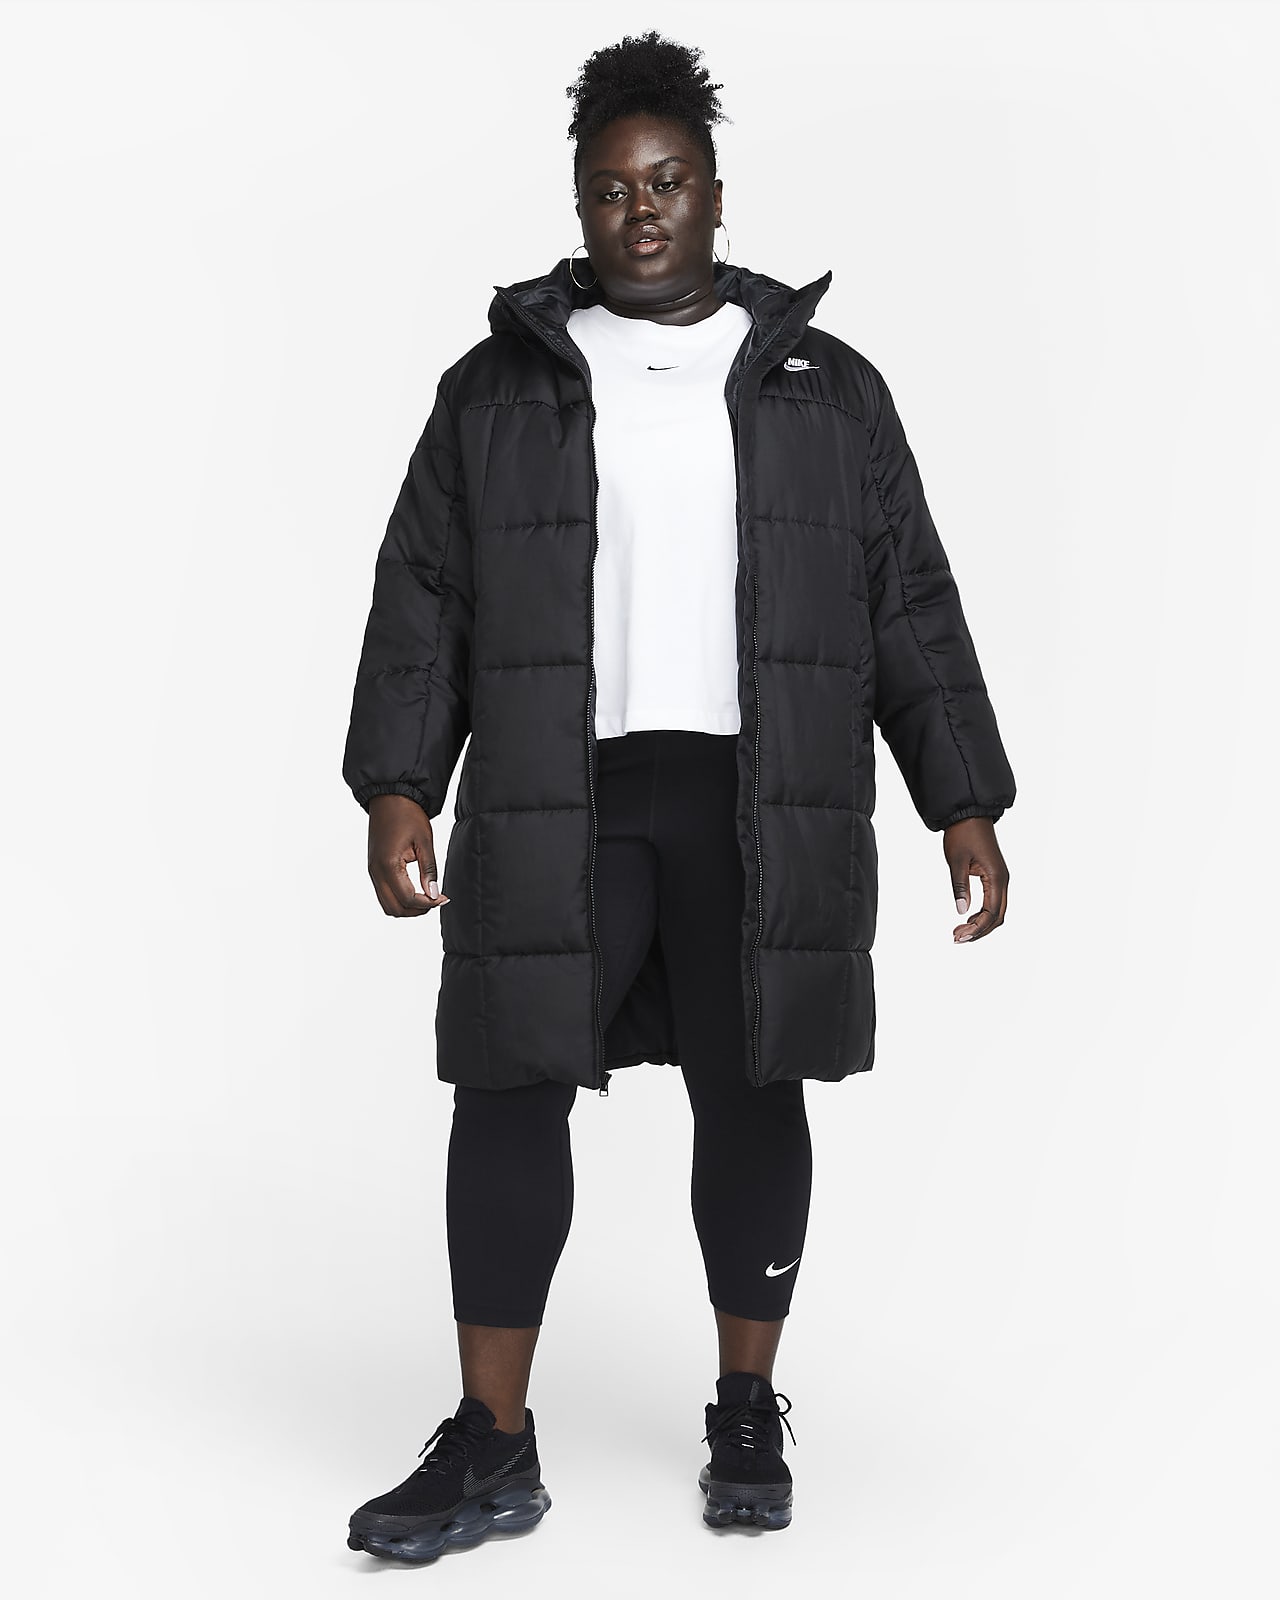 Nike Plus classic longline padded jacket with hood in black